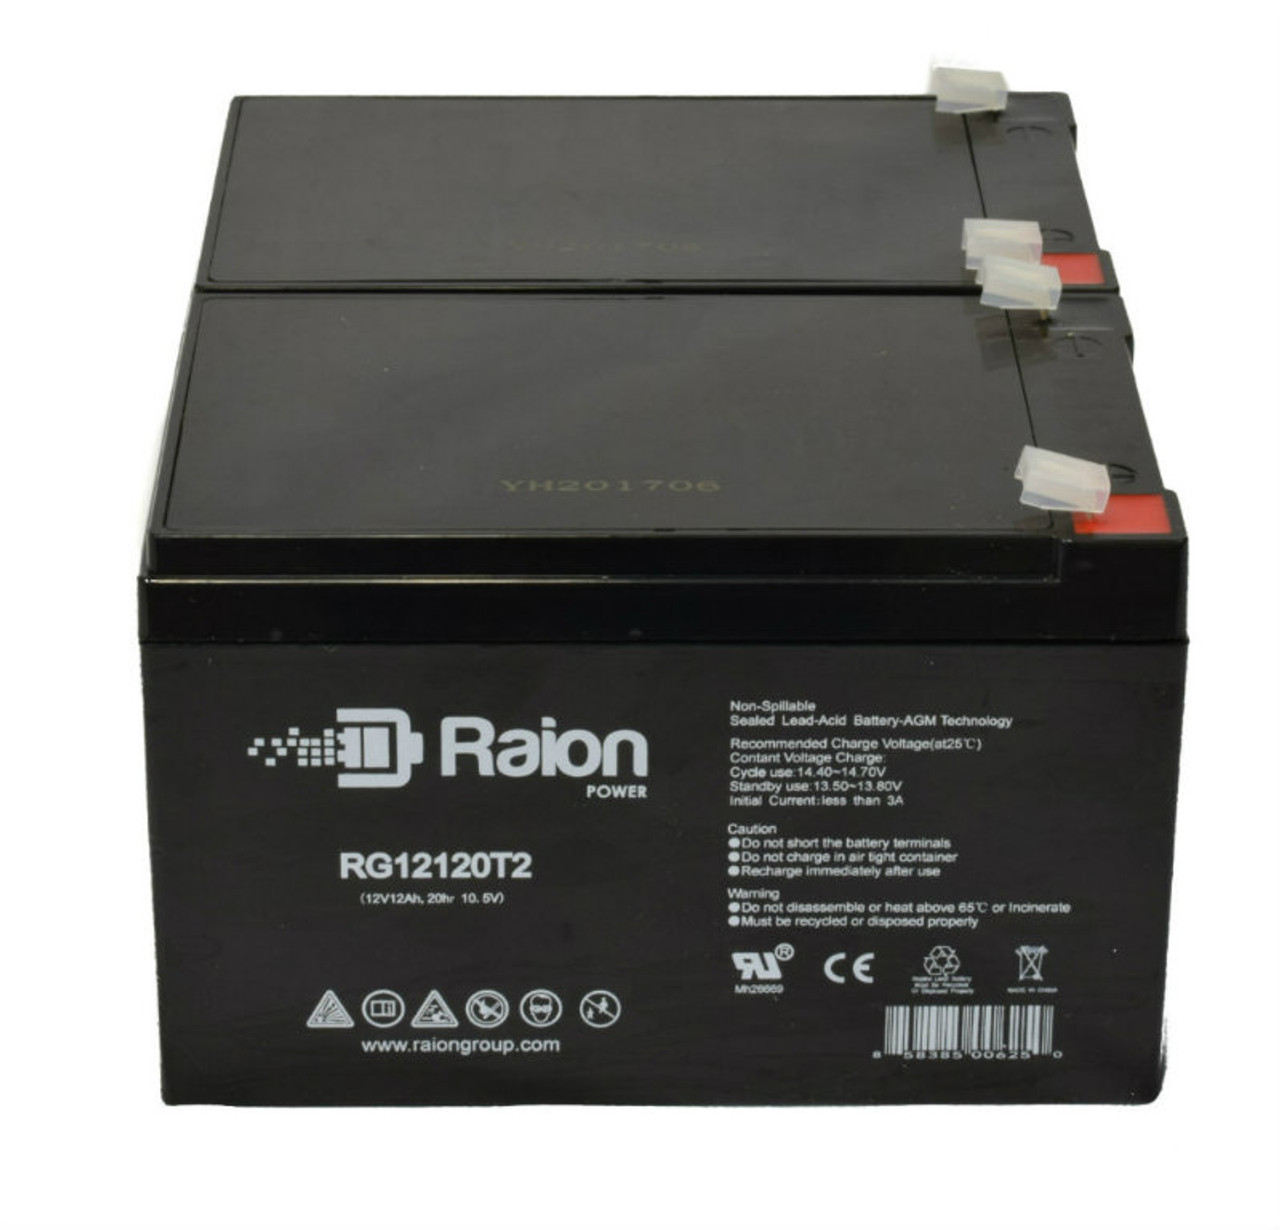 Raion Power RG12120T2 Replacement Battery Set for Zip'r Mobility 3-Wheel Leisure Travel Scooter Mobility Scooter - 2 Pack